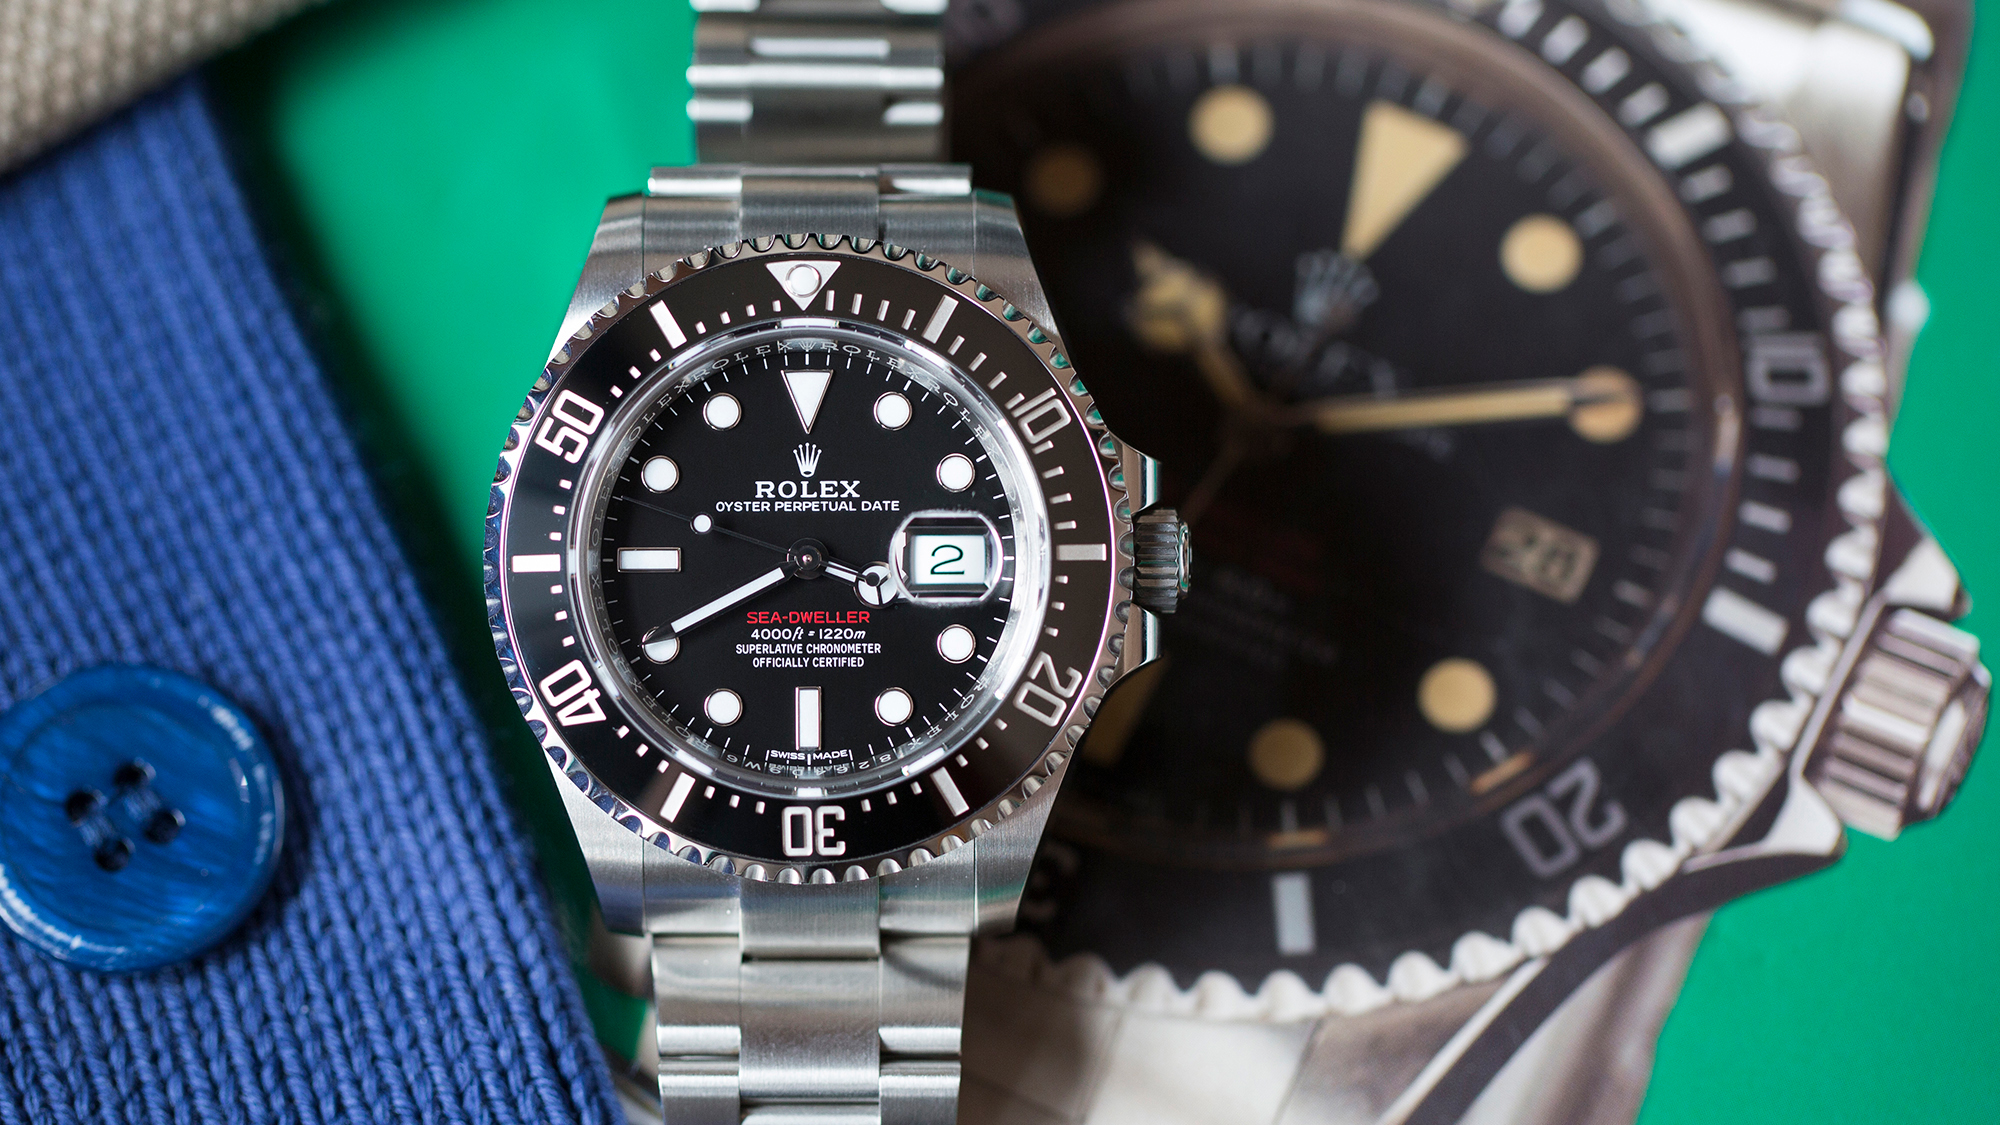 What you need to know about water resistance – The Watch Pages